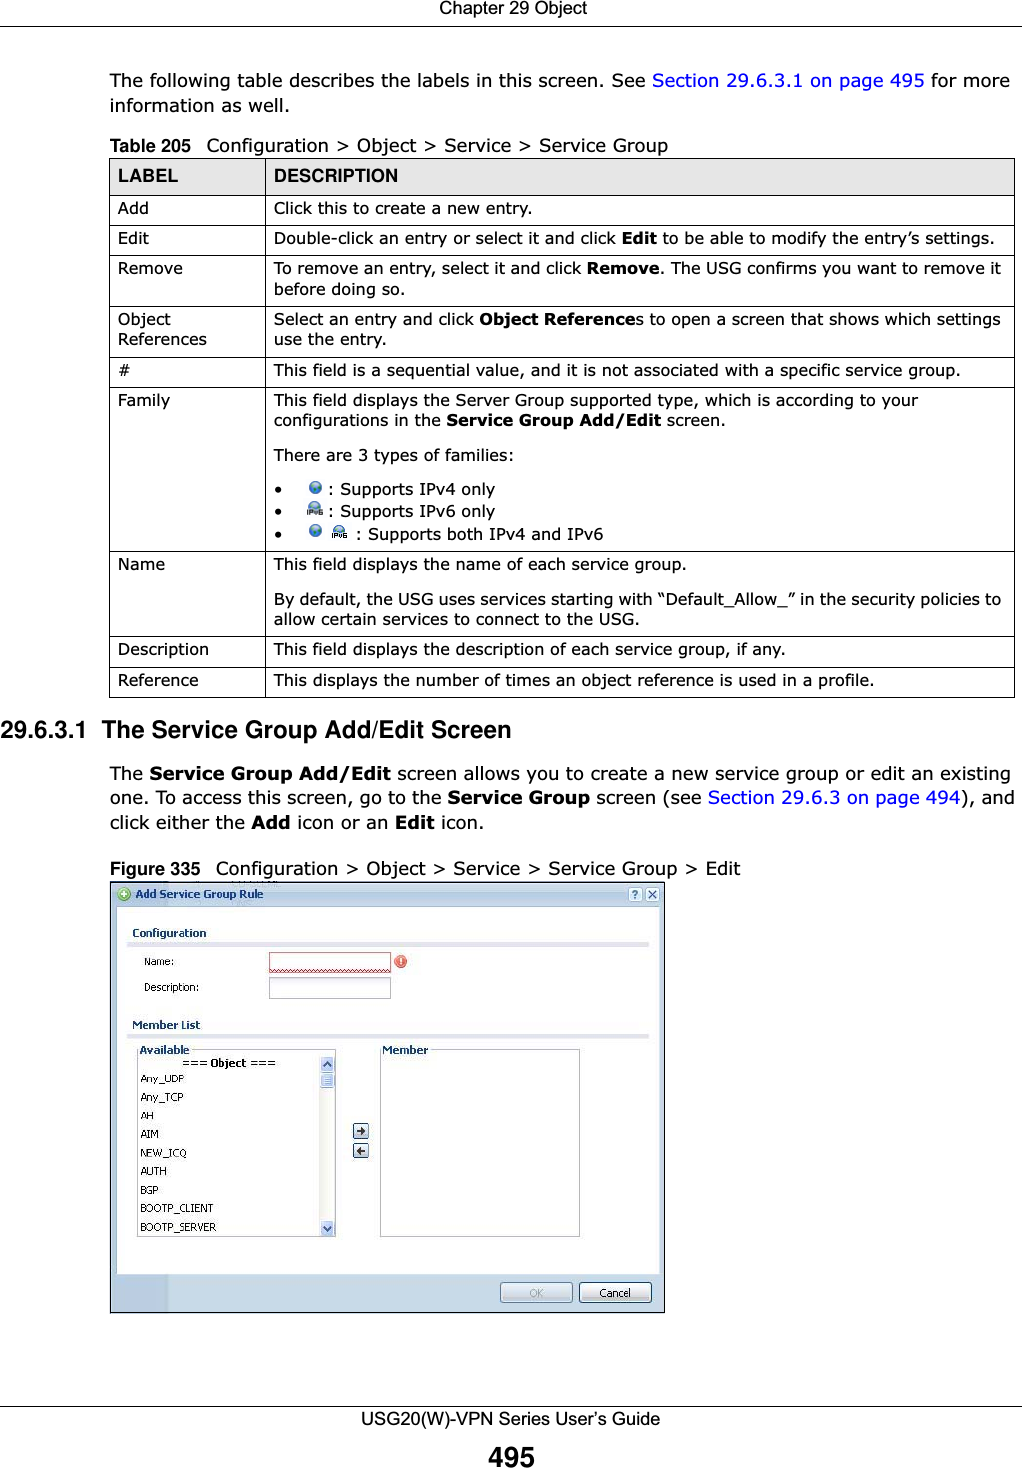  Chapter 29 ObjectUSG20(W)-VPN Series User’s Guide495The following table describes the labels in this screen. See Section 29.6.3.1 on page 495 for more information as well.  29.6.3.1  The Service Group Add/Edit ScreenThe Service Group Add/Edit screen allows you to create a new service group or edit an existing one. To access this screen, go to the Service Group screen (see Section 29.6.3 on page 494), and click either the Add icon or an Edit icon.Figure 335   Configuration &gt; Object &gt; Service &gt; Service Group &gt; EditTable 205   Configuration &gt; Object &gt; Service &gt; Service GroupLABEL DESCRIPTIONAdd Click this to create a new entry.Edit Double-click an entry or select it and click Edit to be able to modify the entry’s settings. Remove To remove an entry, select it and click Remove. The USG confirms you want to remove it before doing so.Object ReferencesSelect an entry and click Object References to open a screen that shows which settings use the entry.# This field is a sequential value, and it is not associated with a specific service group.Family This field displays the Server Group supported type, which is according to your configurations in the Service Group Add/Edit screen. There are 3 types of families: • : Supports IPv4 only• : Supports IPv6 only• : Supports both IPv4 and IPv6Name This field displays the name of each service group.By default, the USG uses services starting with “Default_Allow_” in the security policies to allow certain services to connect to the USG.Description This field displays the description of each service group, if any.Reference This displays the number of times an object reference is used in a profile.